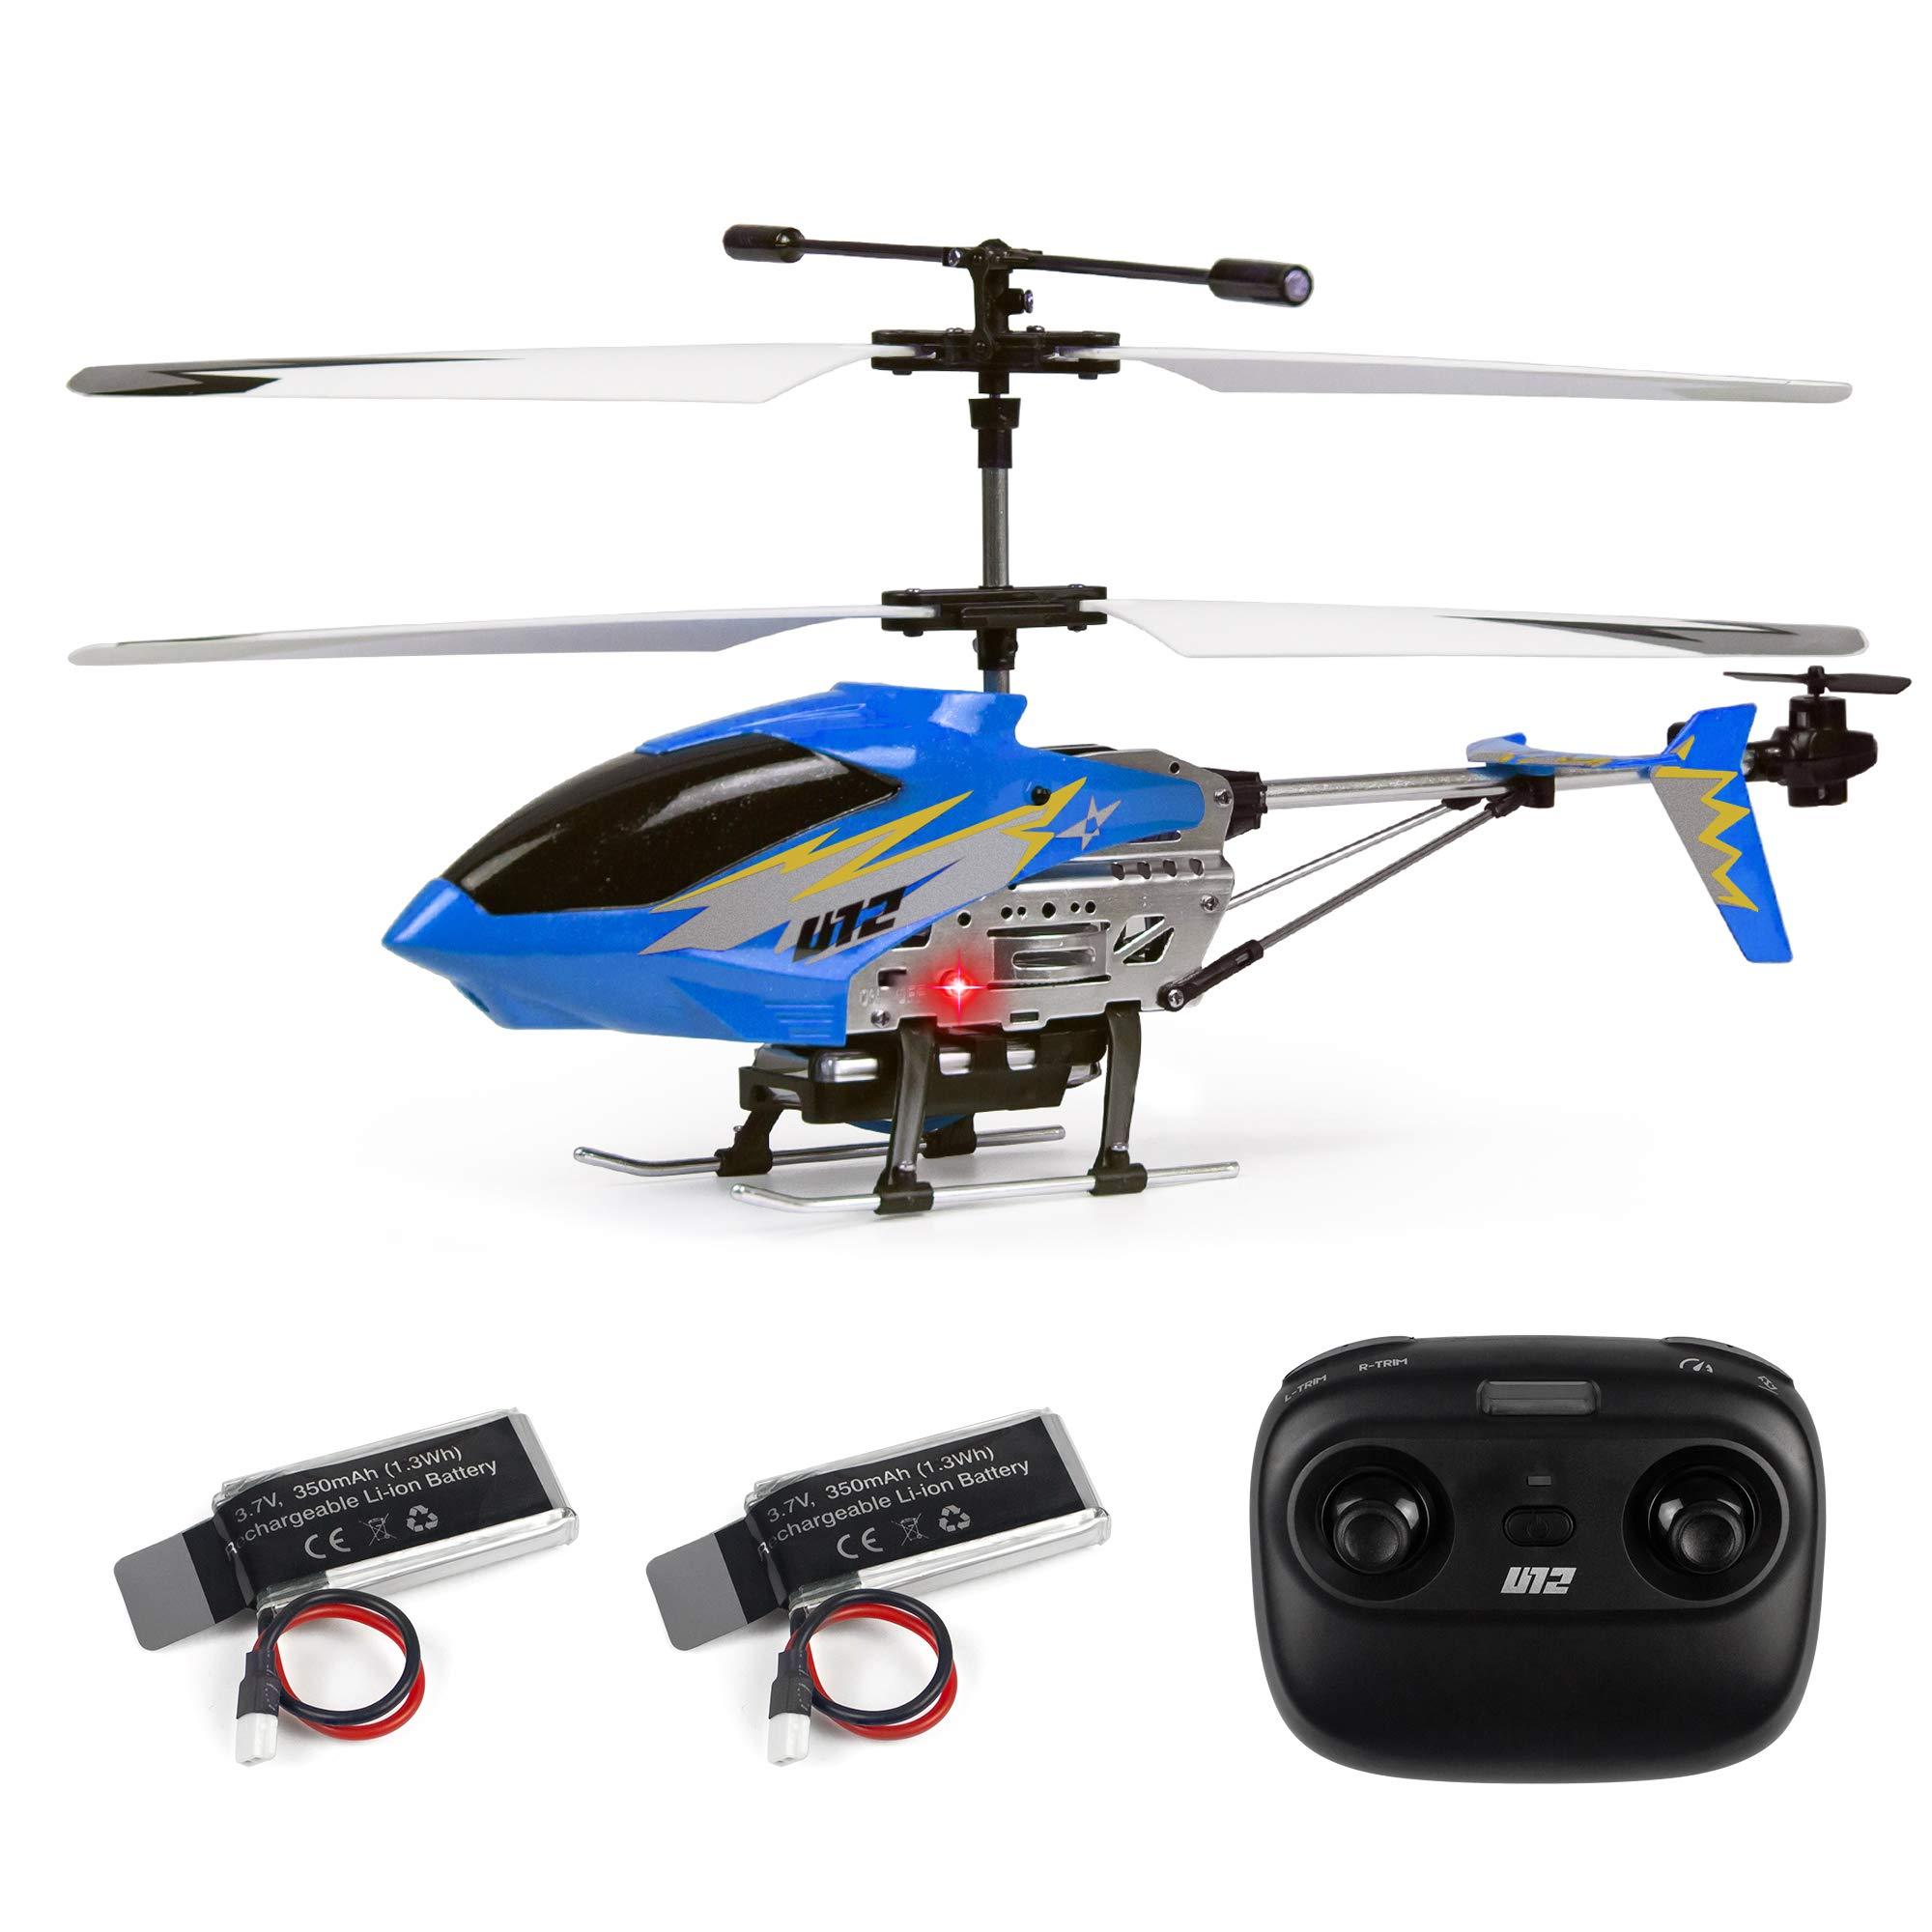 Cheap Rc Helicopter: Types and Features of Cheap RC Helicopters